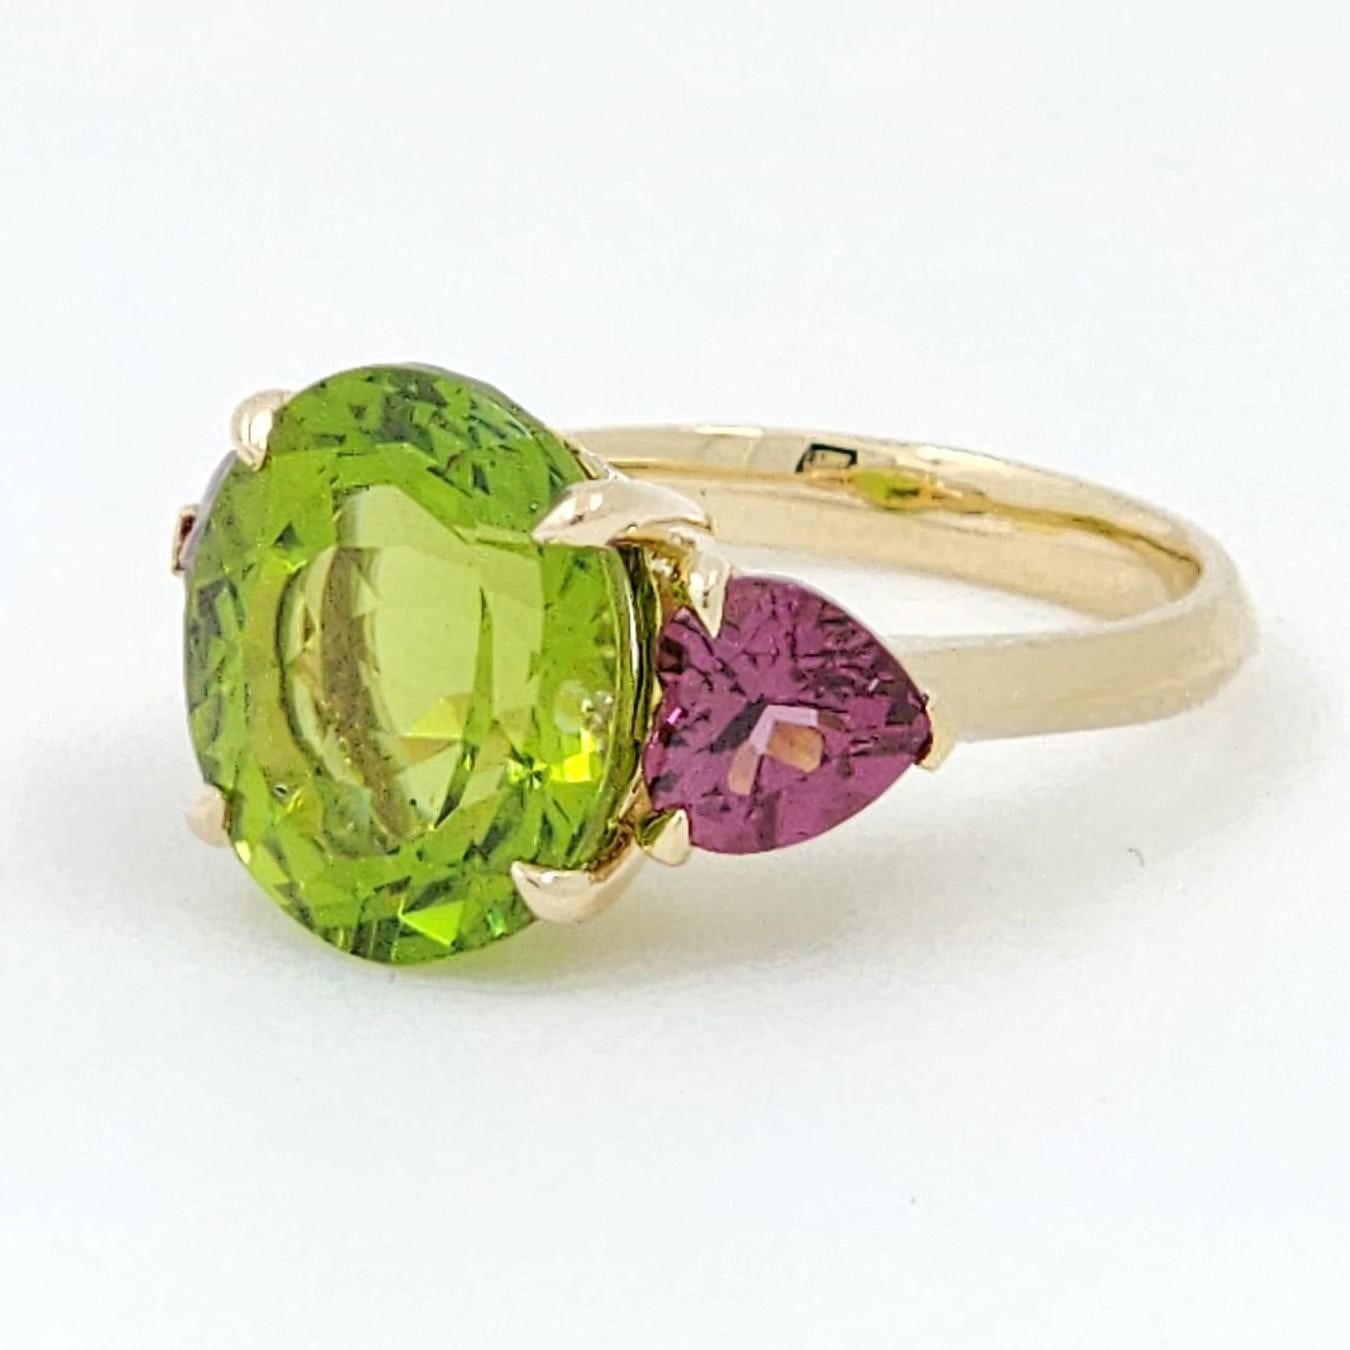 Contemporary 7.08Ct Peridot 1.97Ct Garnet and Diamond Ring in 14 Karat Yellow Gold For Sale